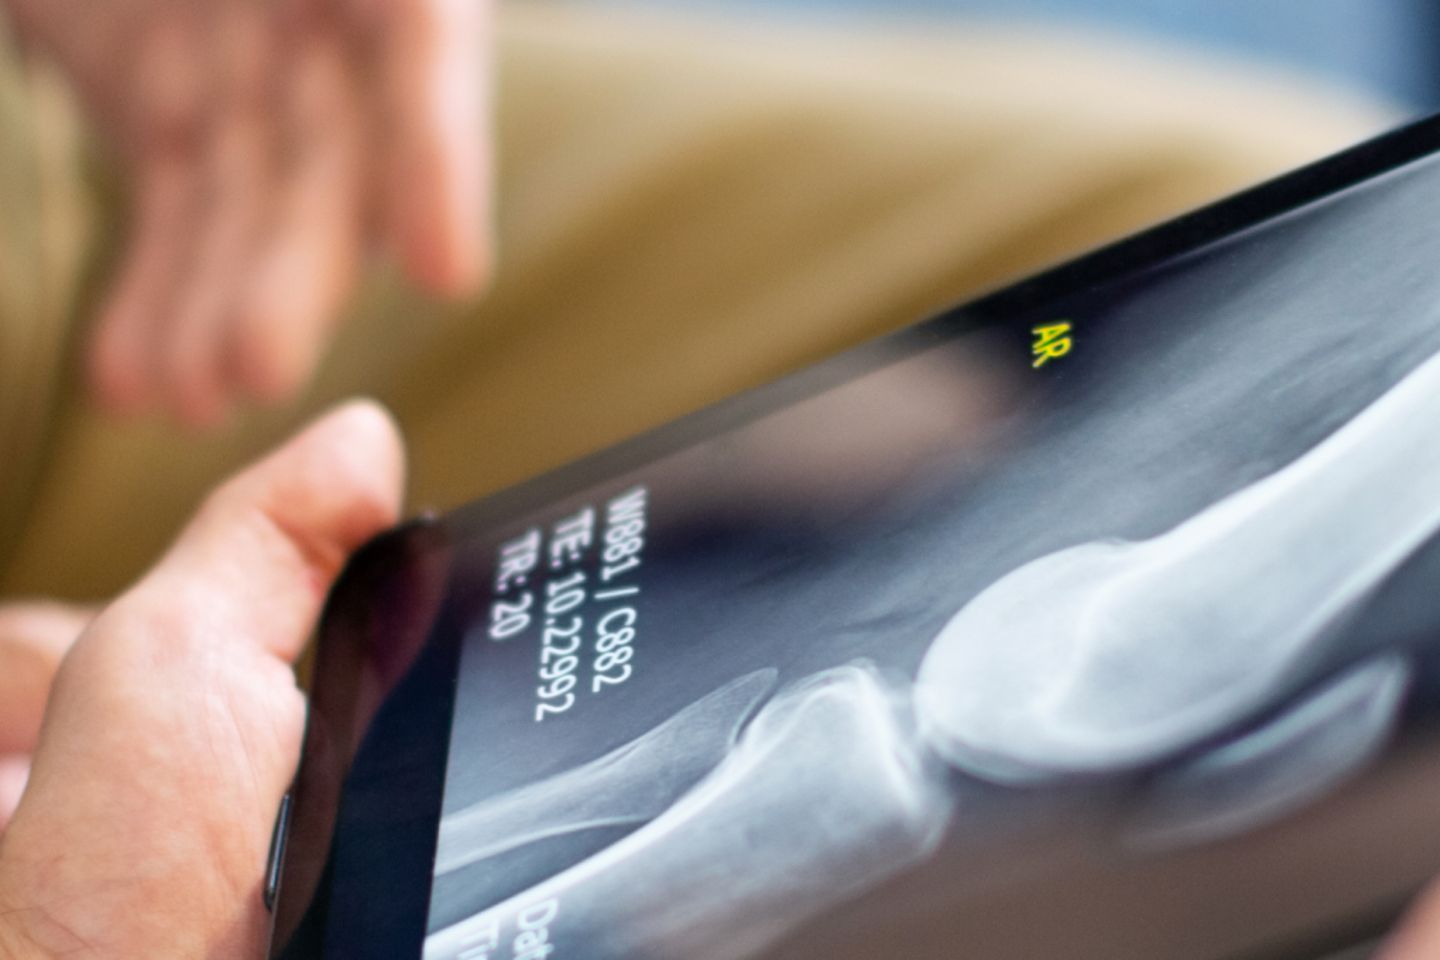 Hands holding tablet with X-ray image. In the background hands of another person - blurred.